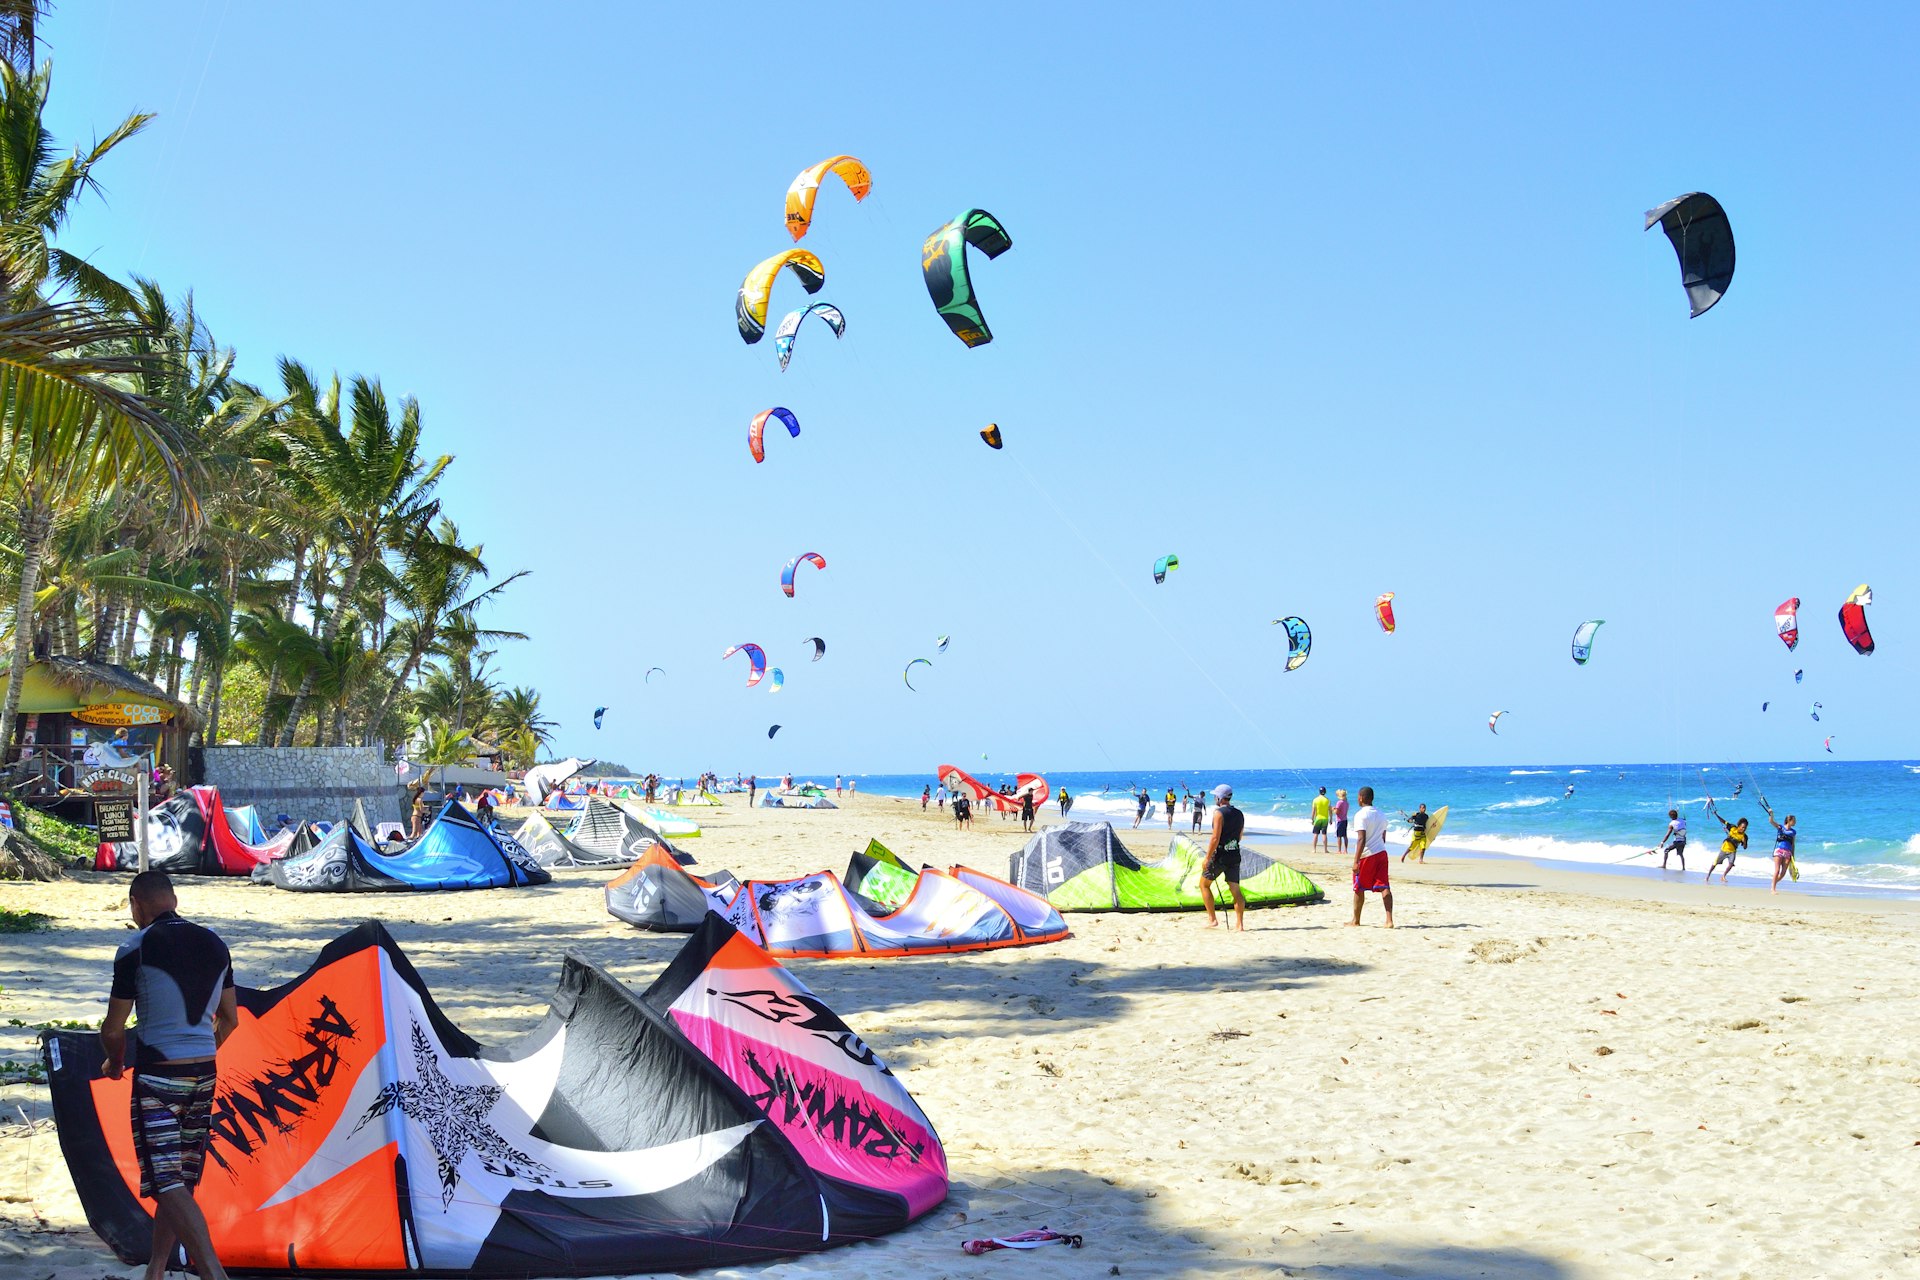 Groups of people fly their kites on a sandy beach in Cabarete, Dominican Republic